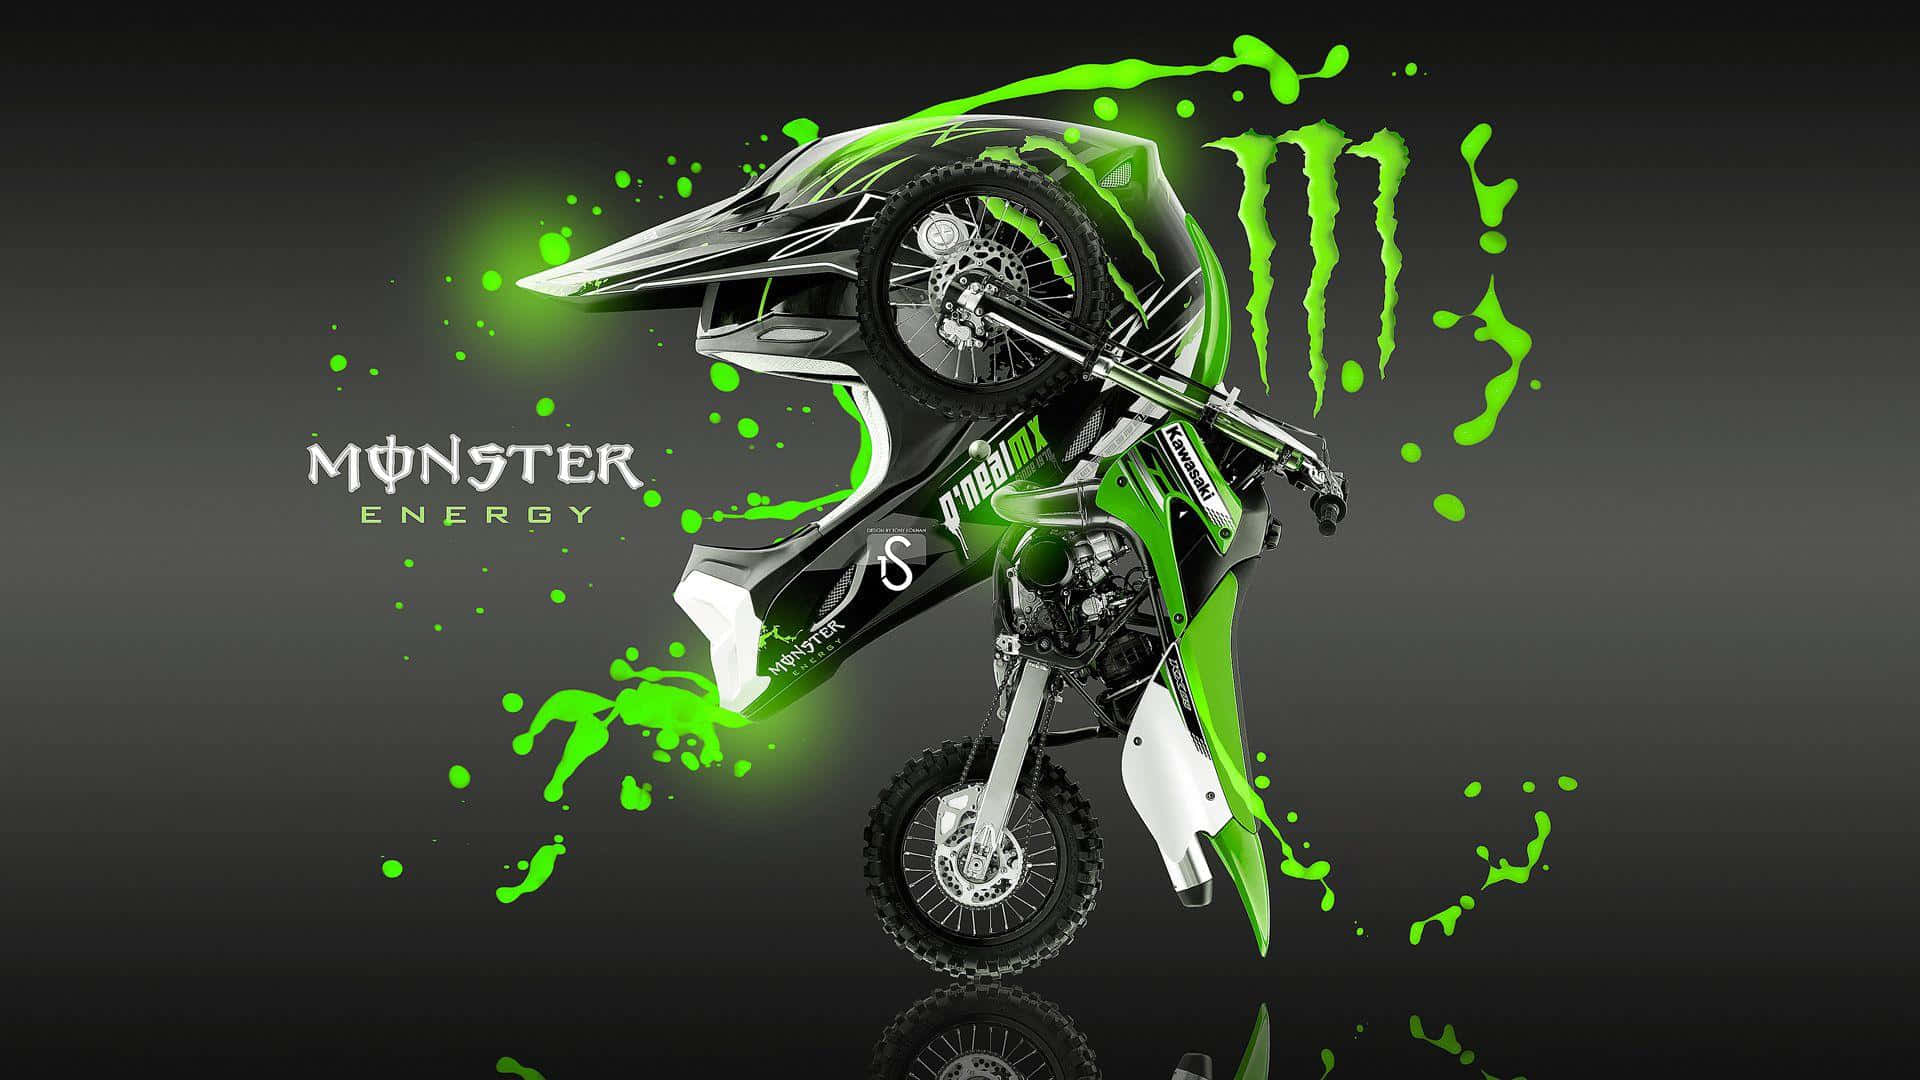 Unleash the Monster Energy Within